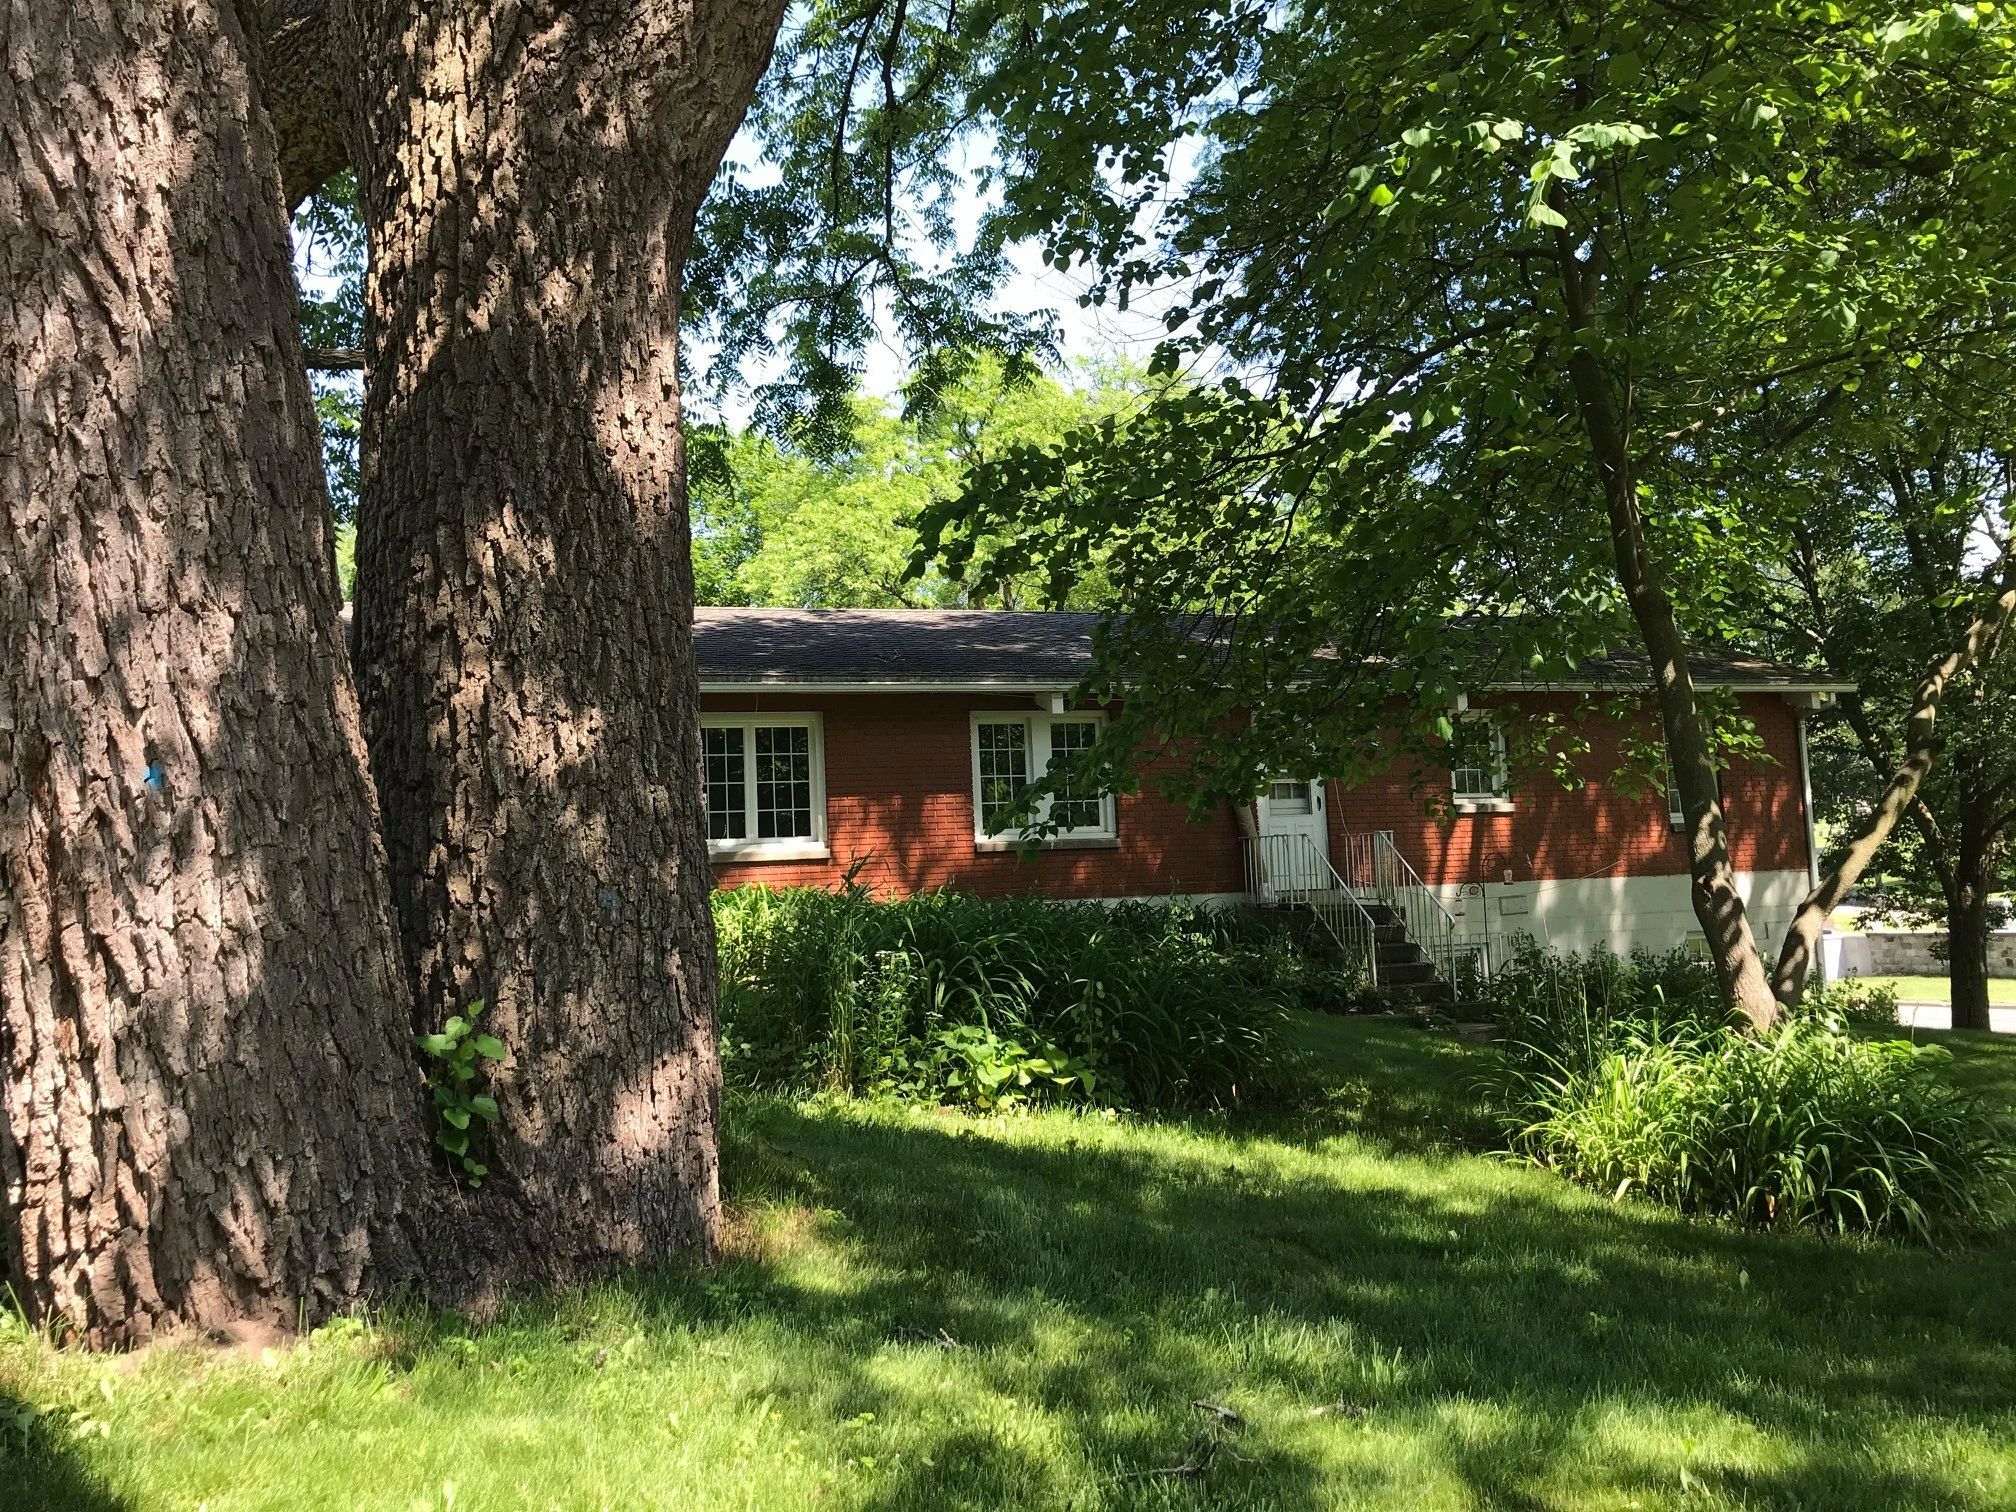 
The Kalamazoo Friends Meetinghouse, shaded by a large tree.